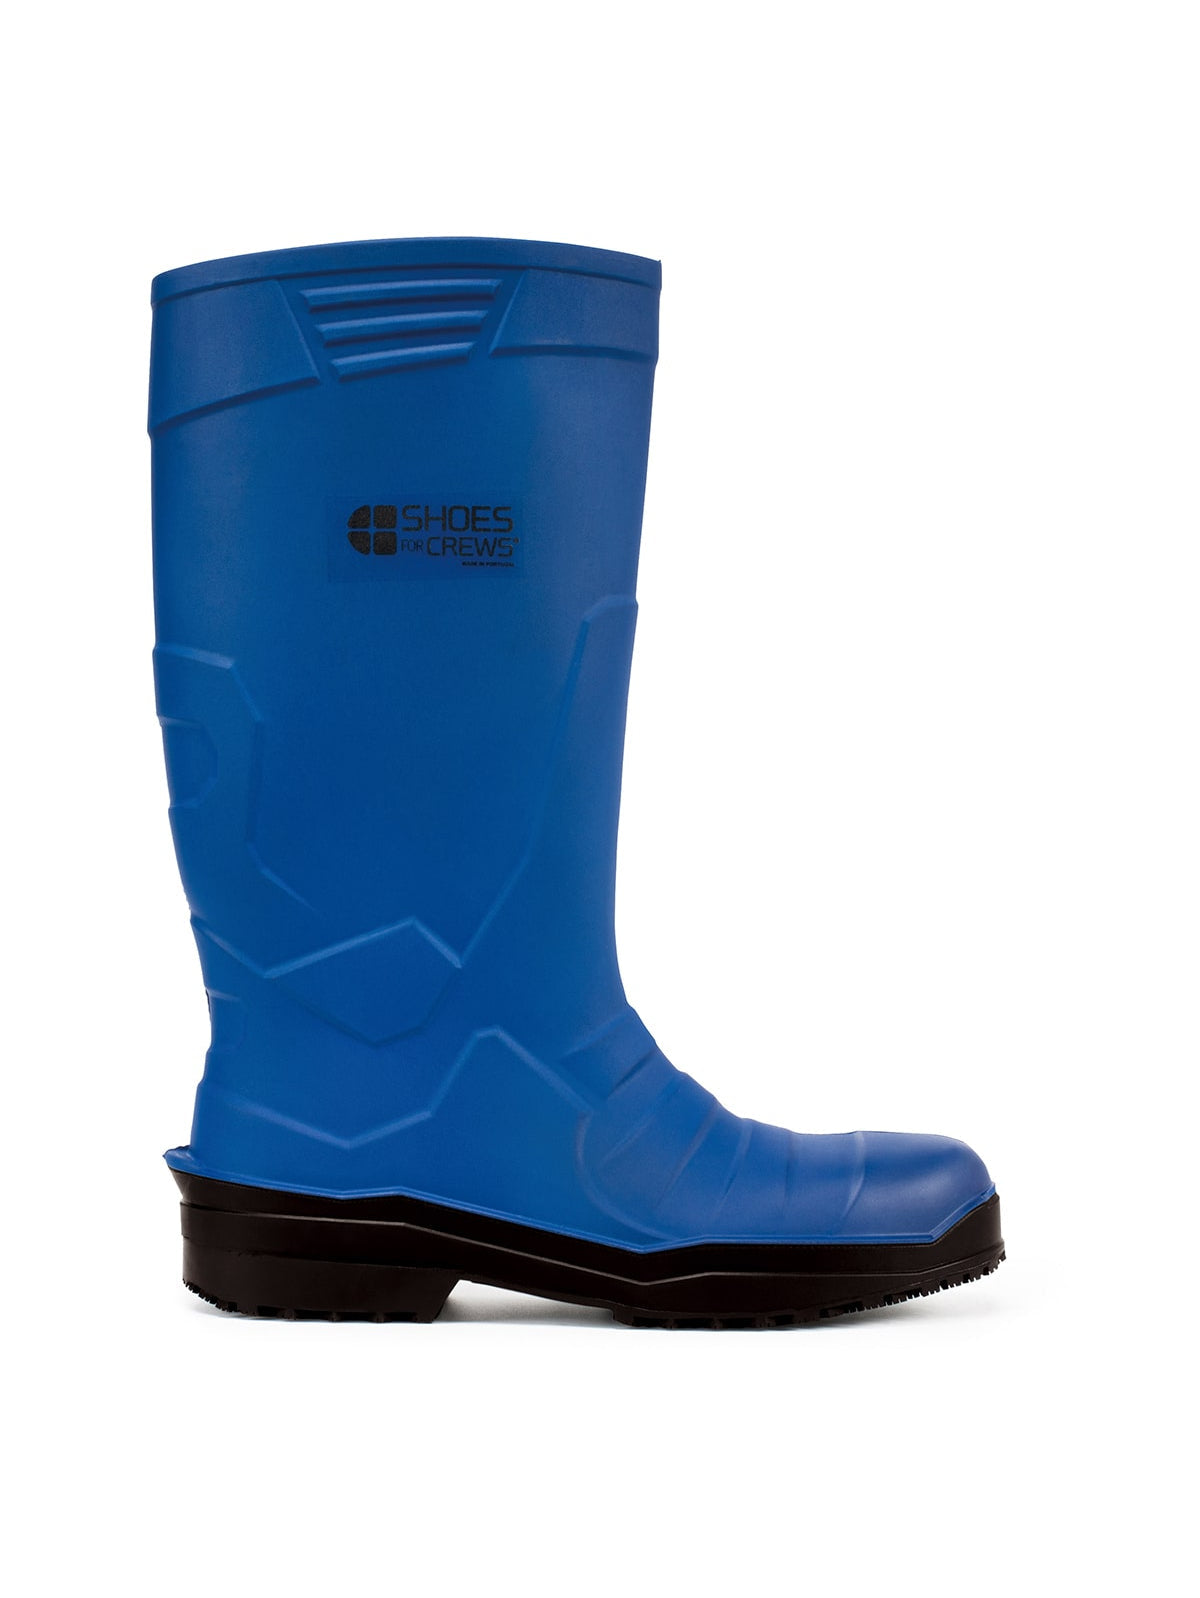 Unisex Safety Boot Sentinel Blue (S4) by  Shoes For Crews.